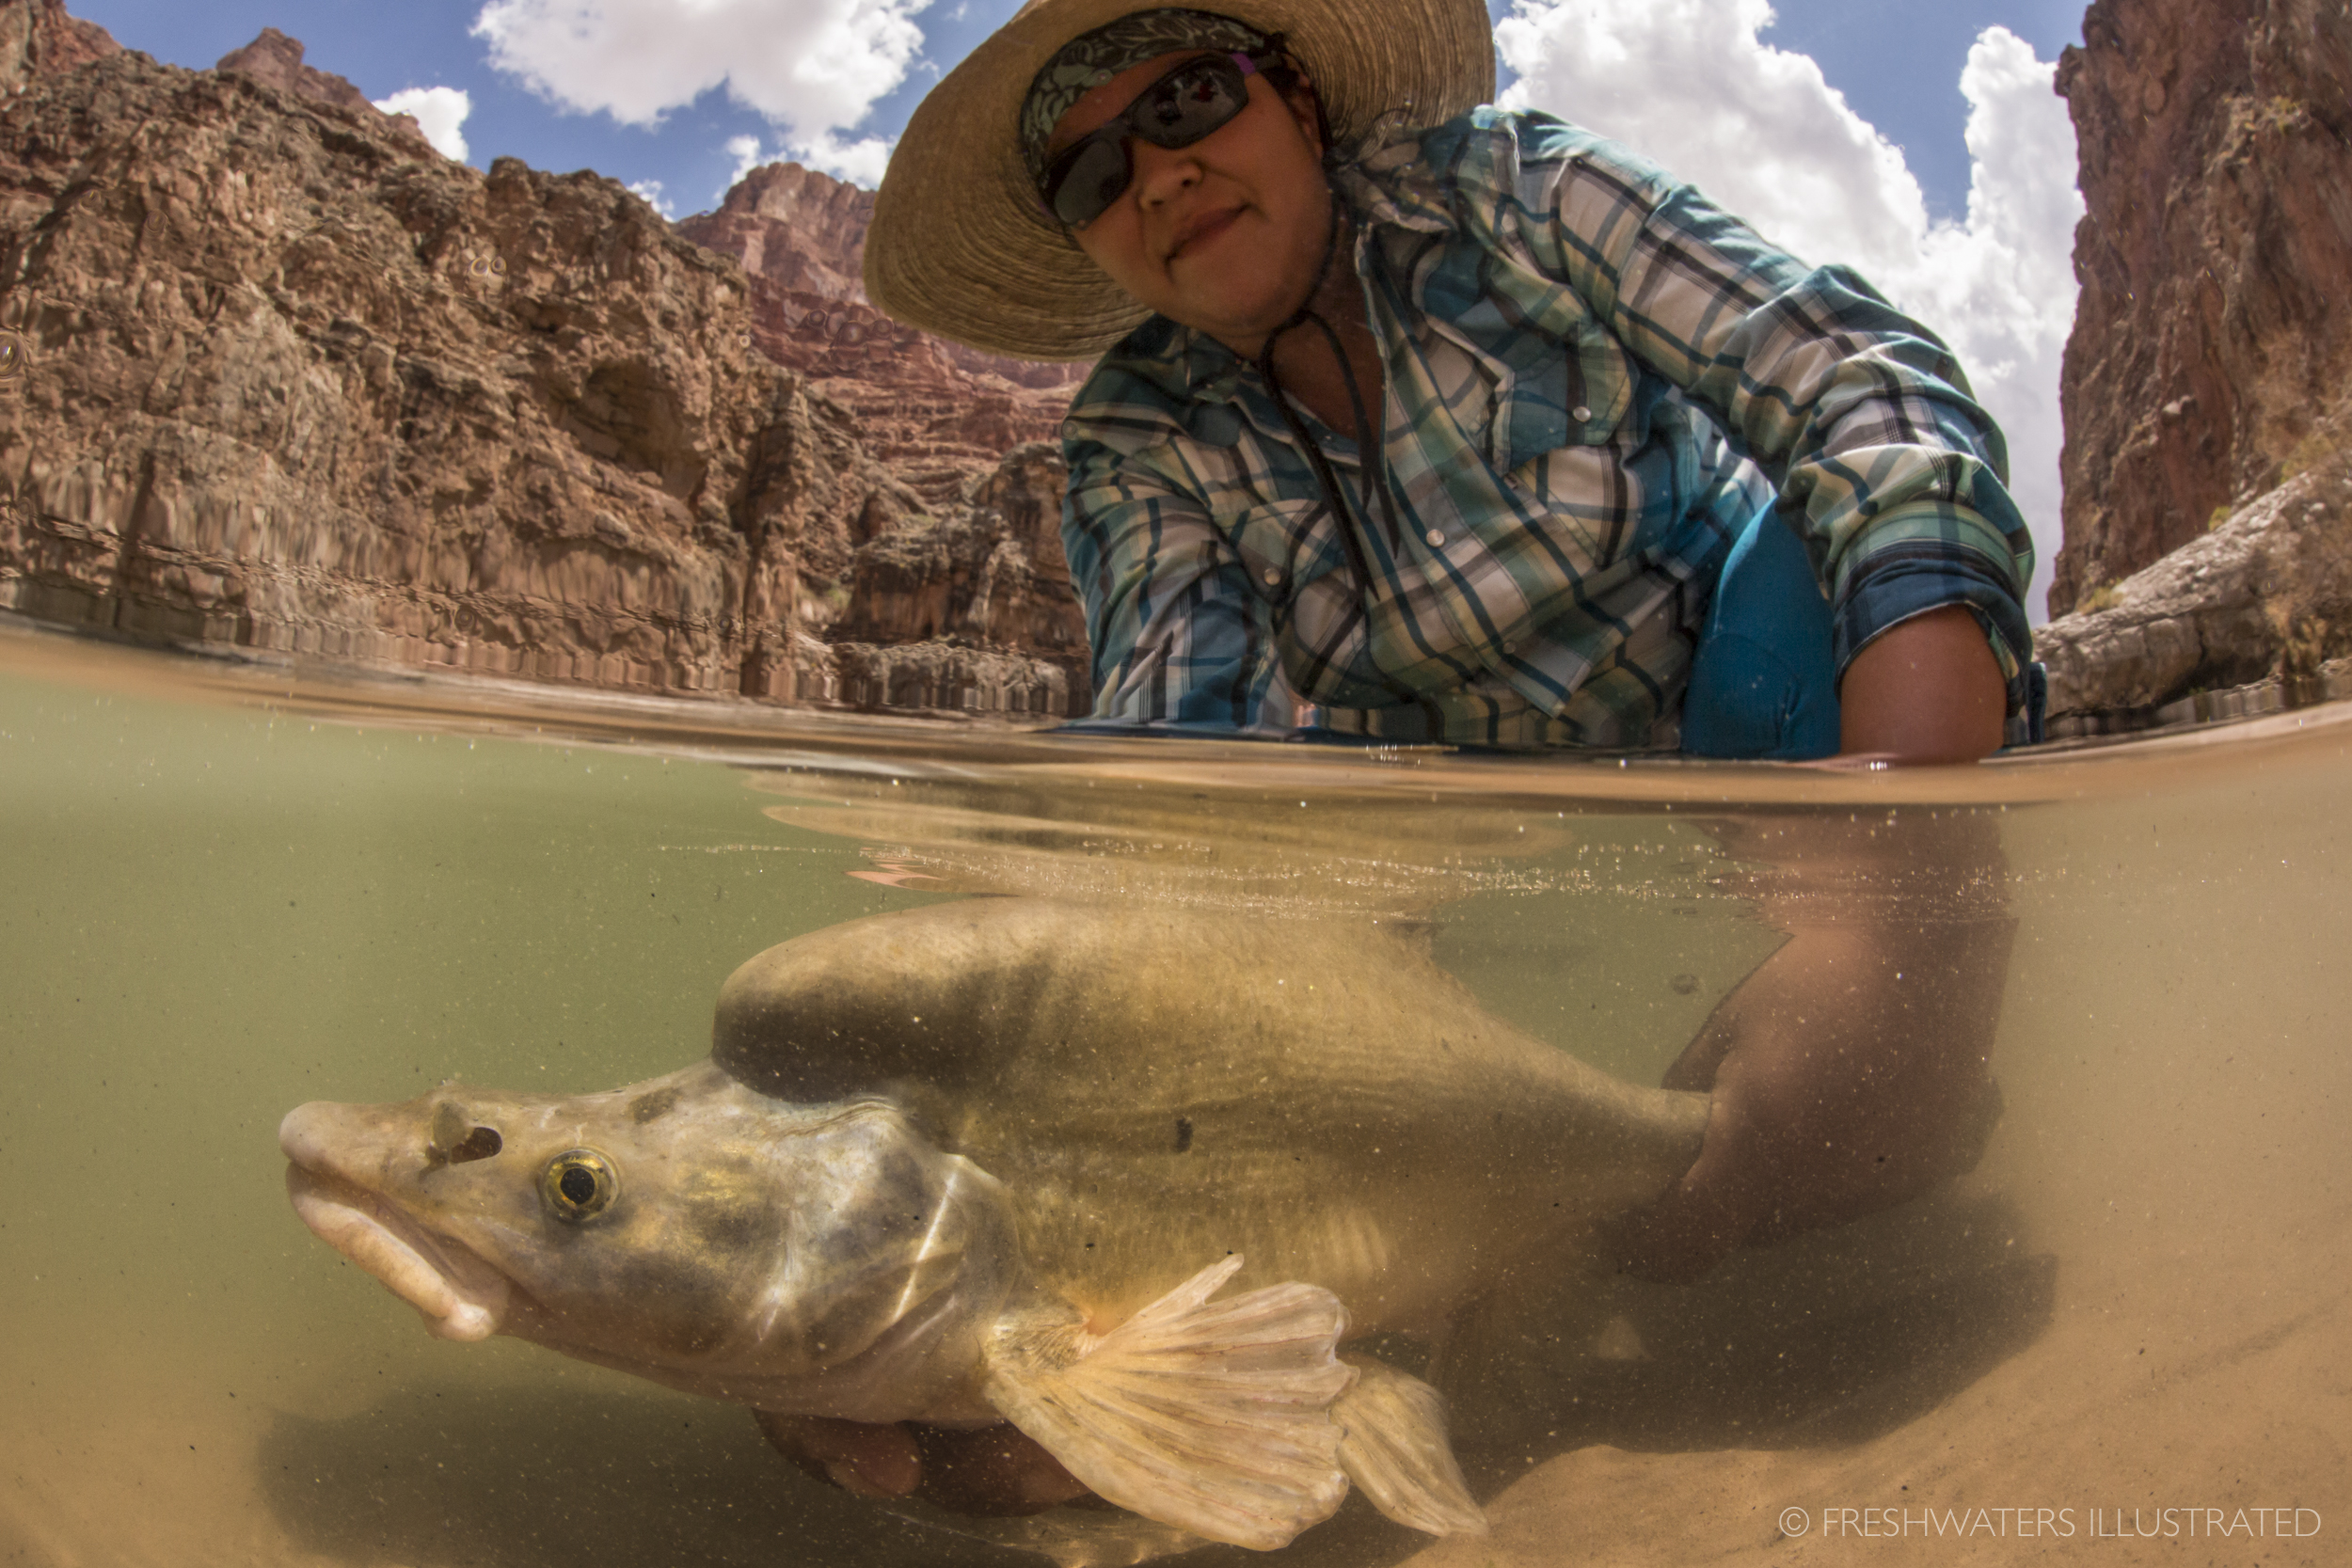  Grand Canyon Youth river guide Steph Jackson returns a beautiful humpback chub back into the mighty Colorado, after biological measurements are collected and recorded. Data gathered on Grand Canyon Youth trips are now helping researchers understand 